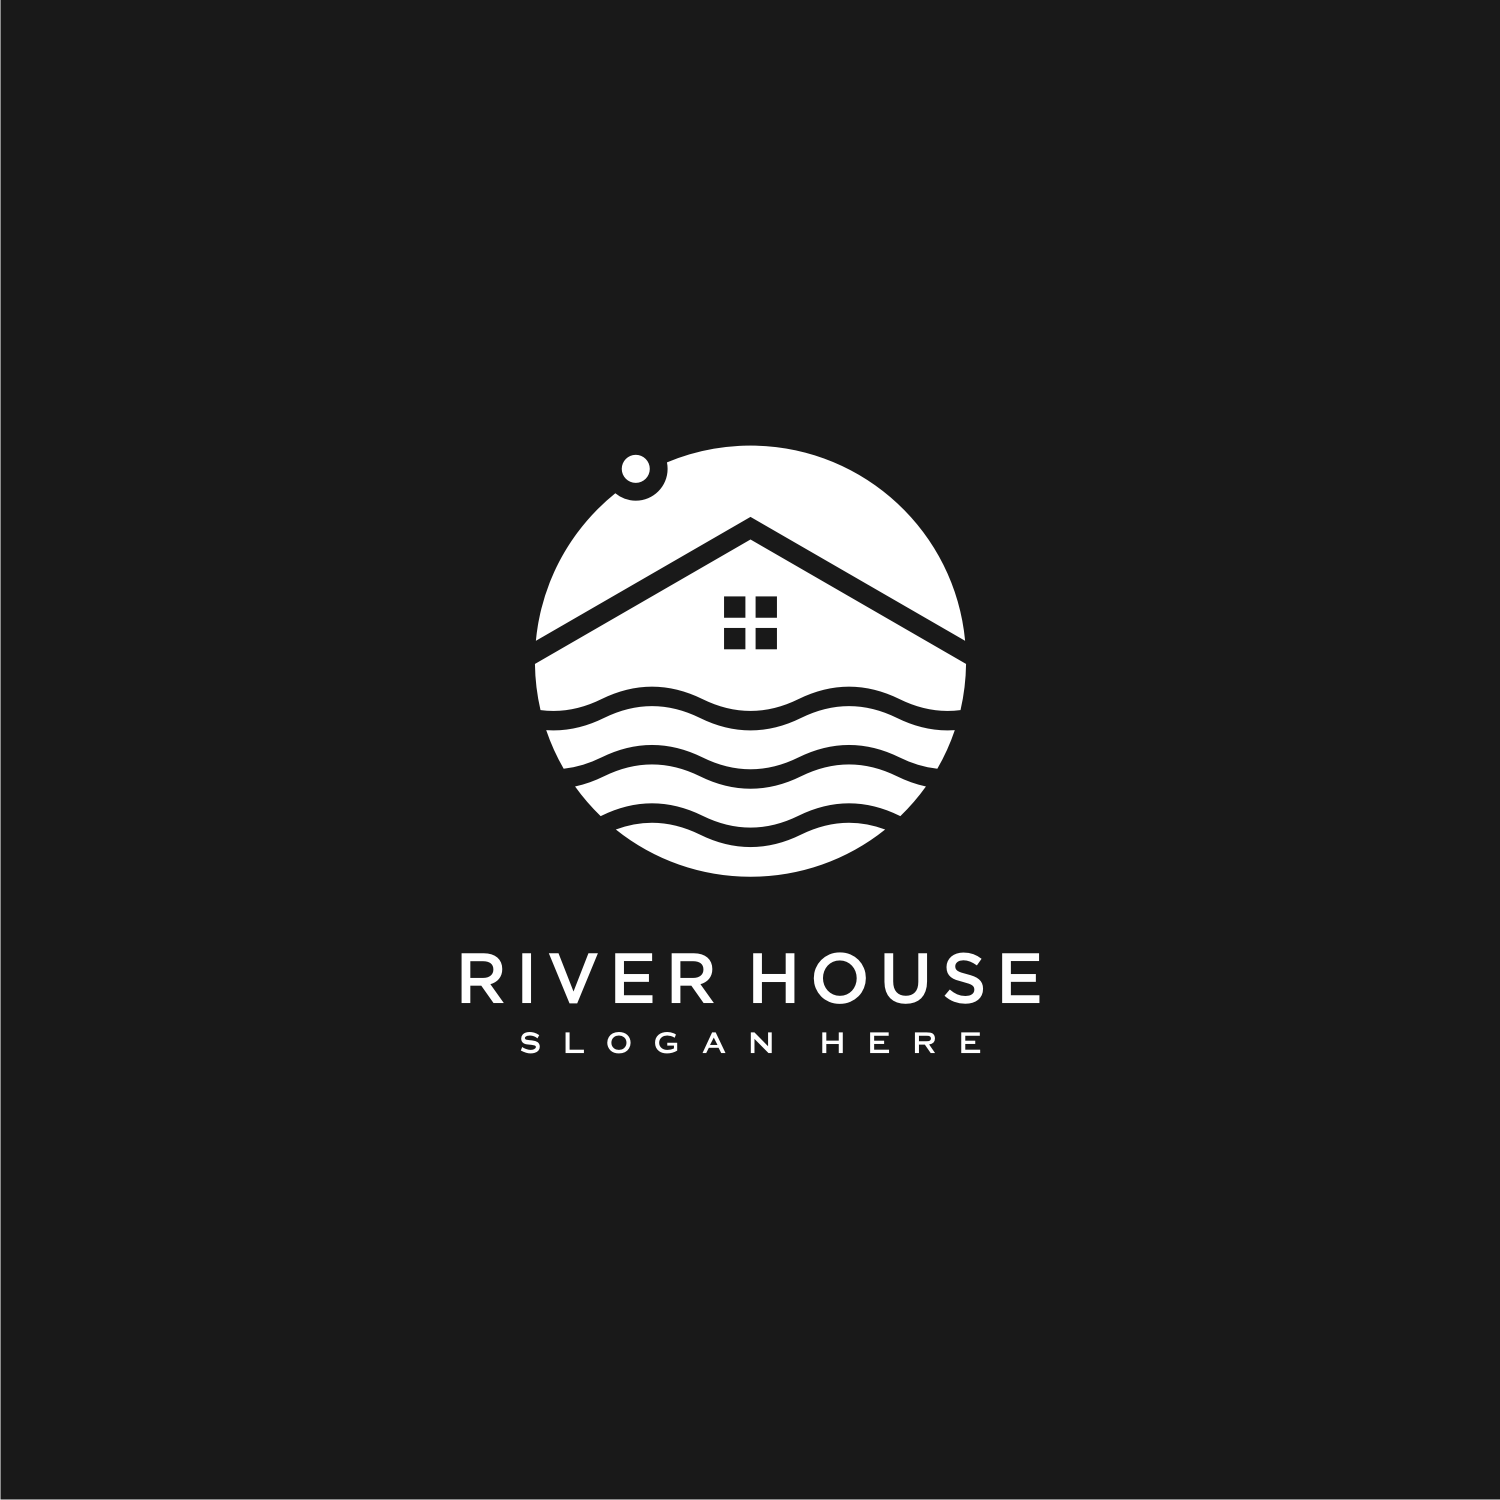 Set Of Minimalist Line Abstract House With River Logo Design Scaled Black.